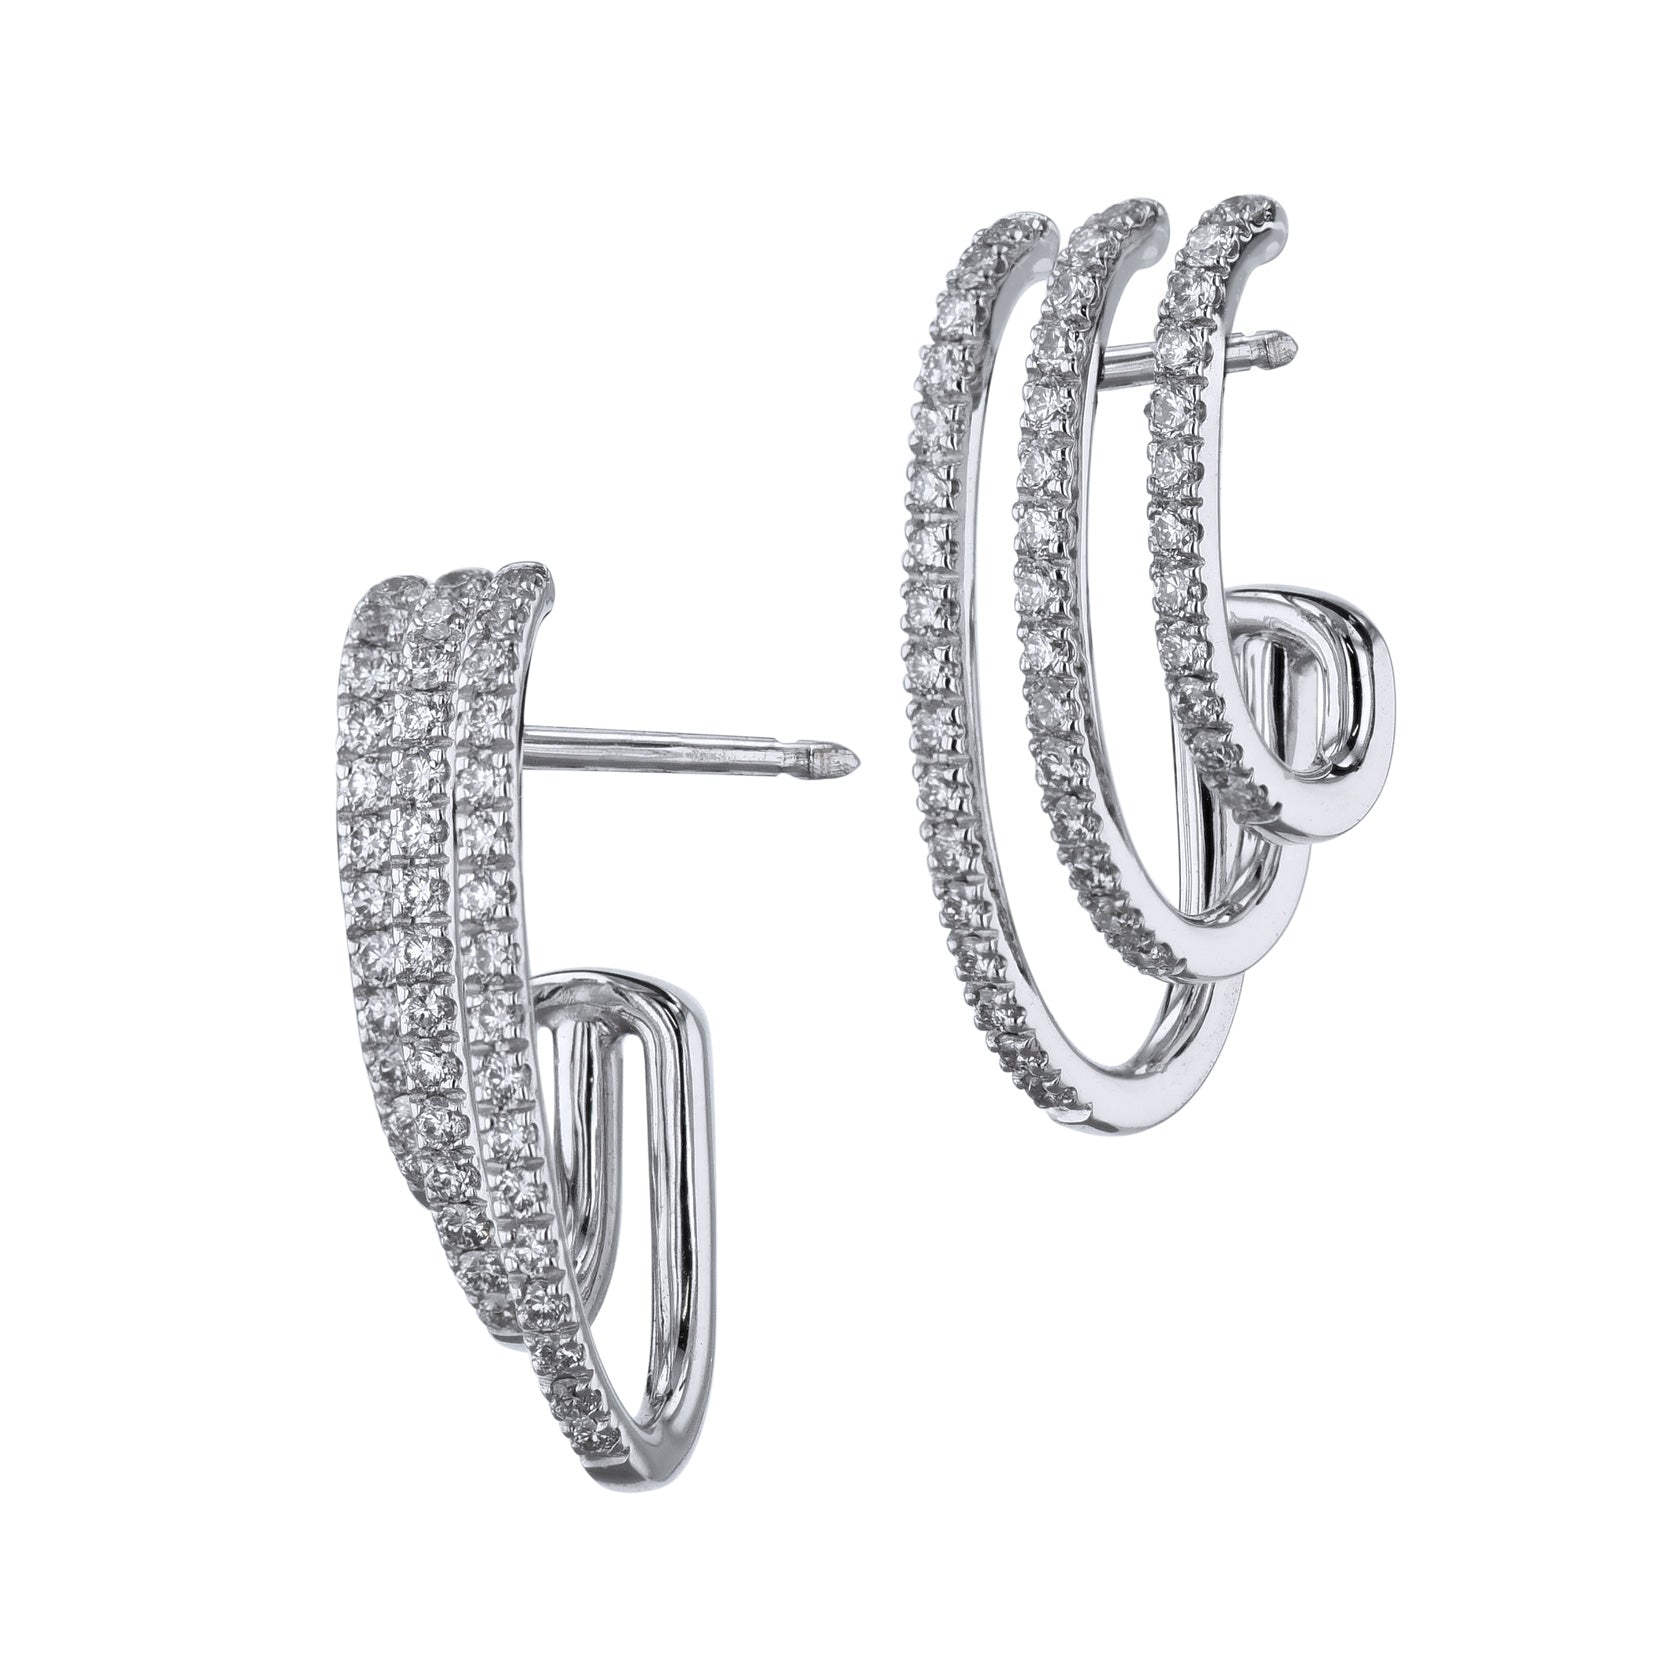 Pave Diamond White Gold Earrings Earrings Curated by H